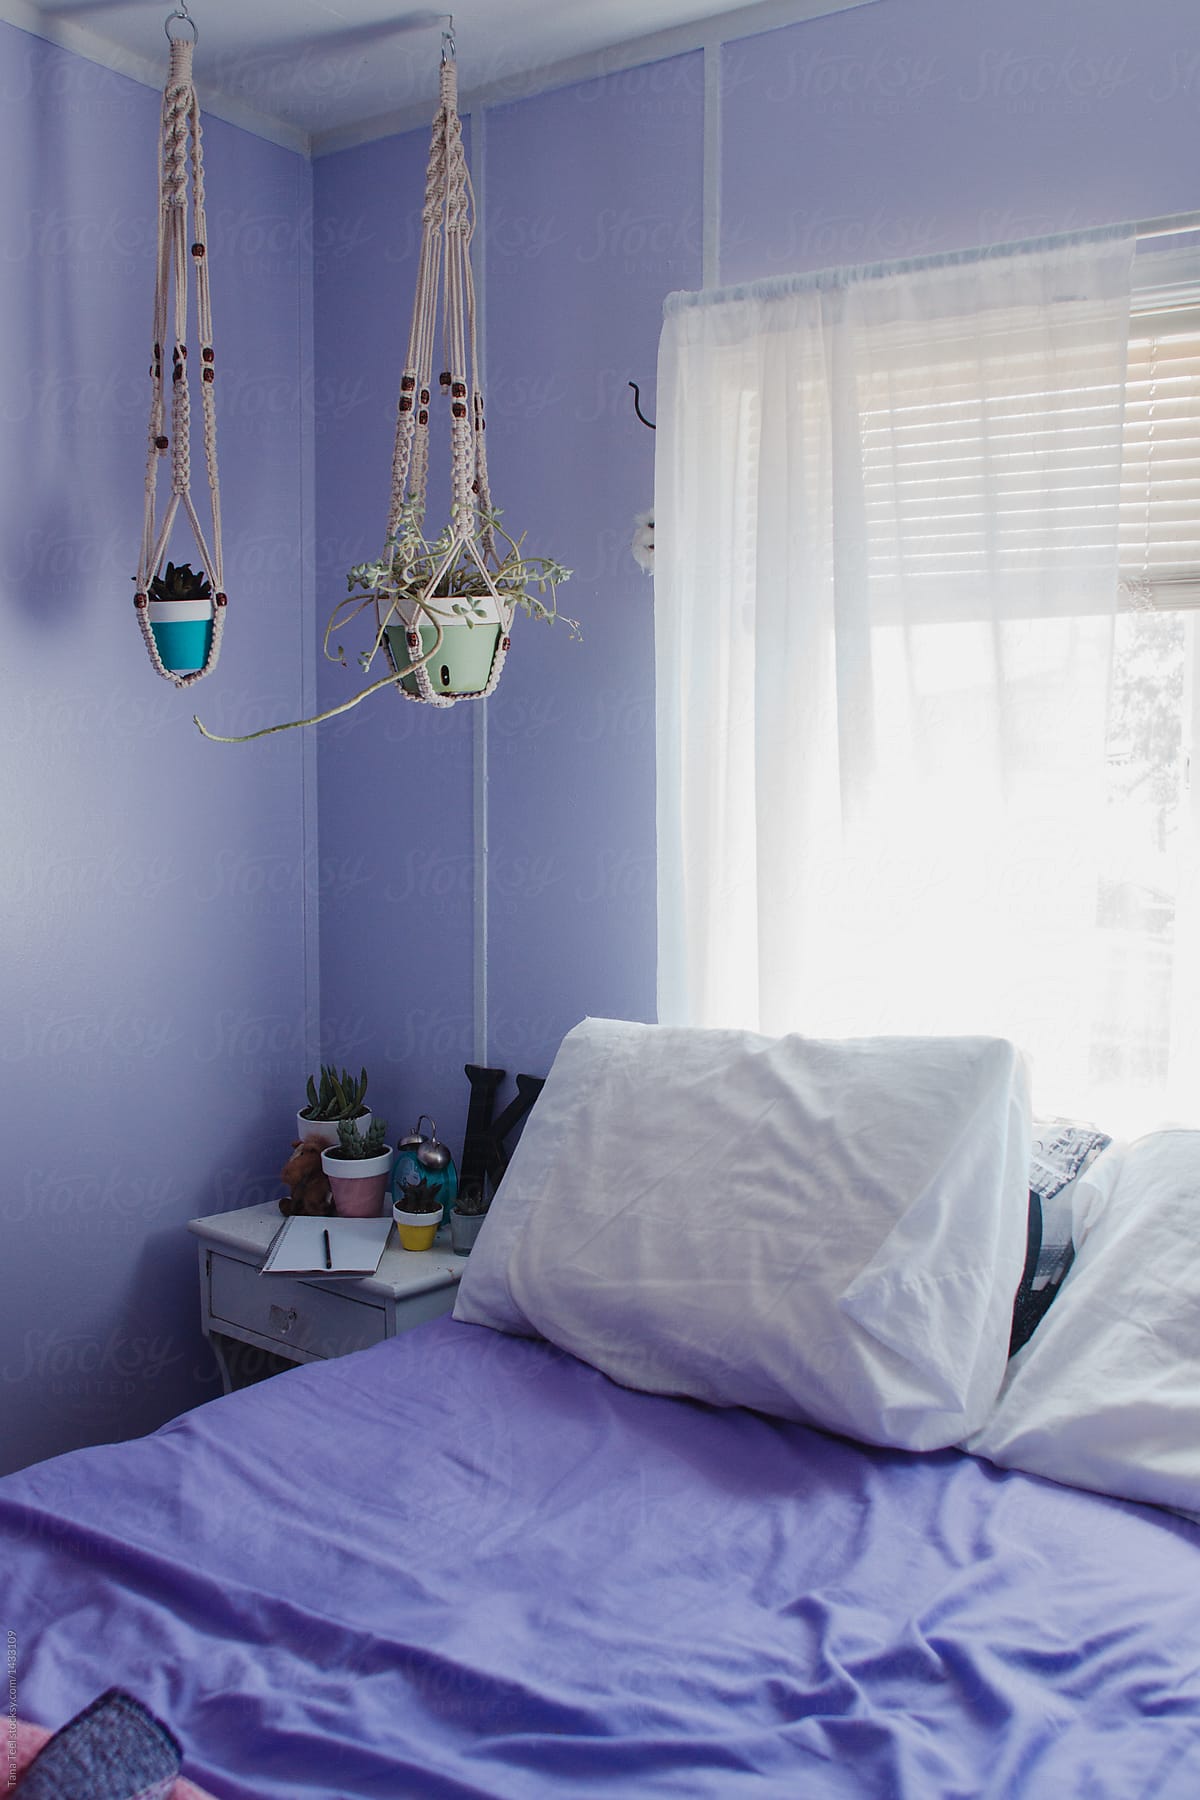 colorful pots hang in macrame next to empty bed w